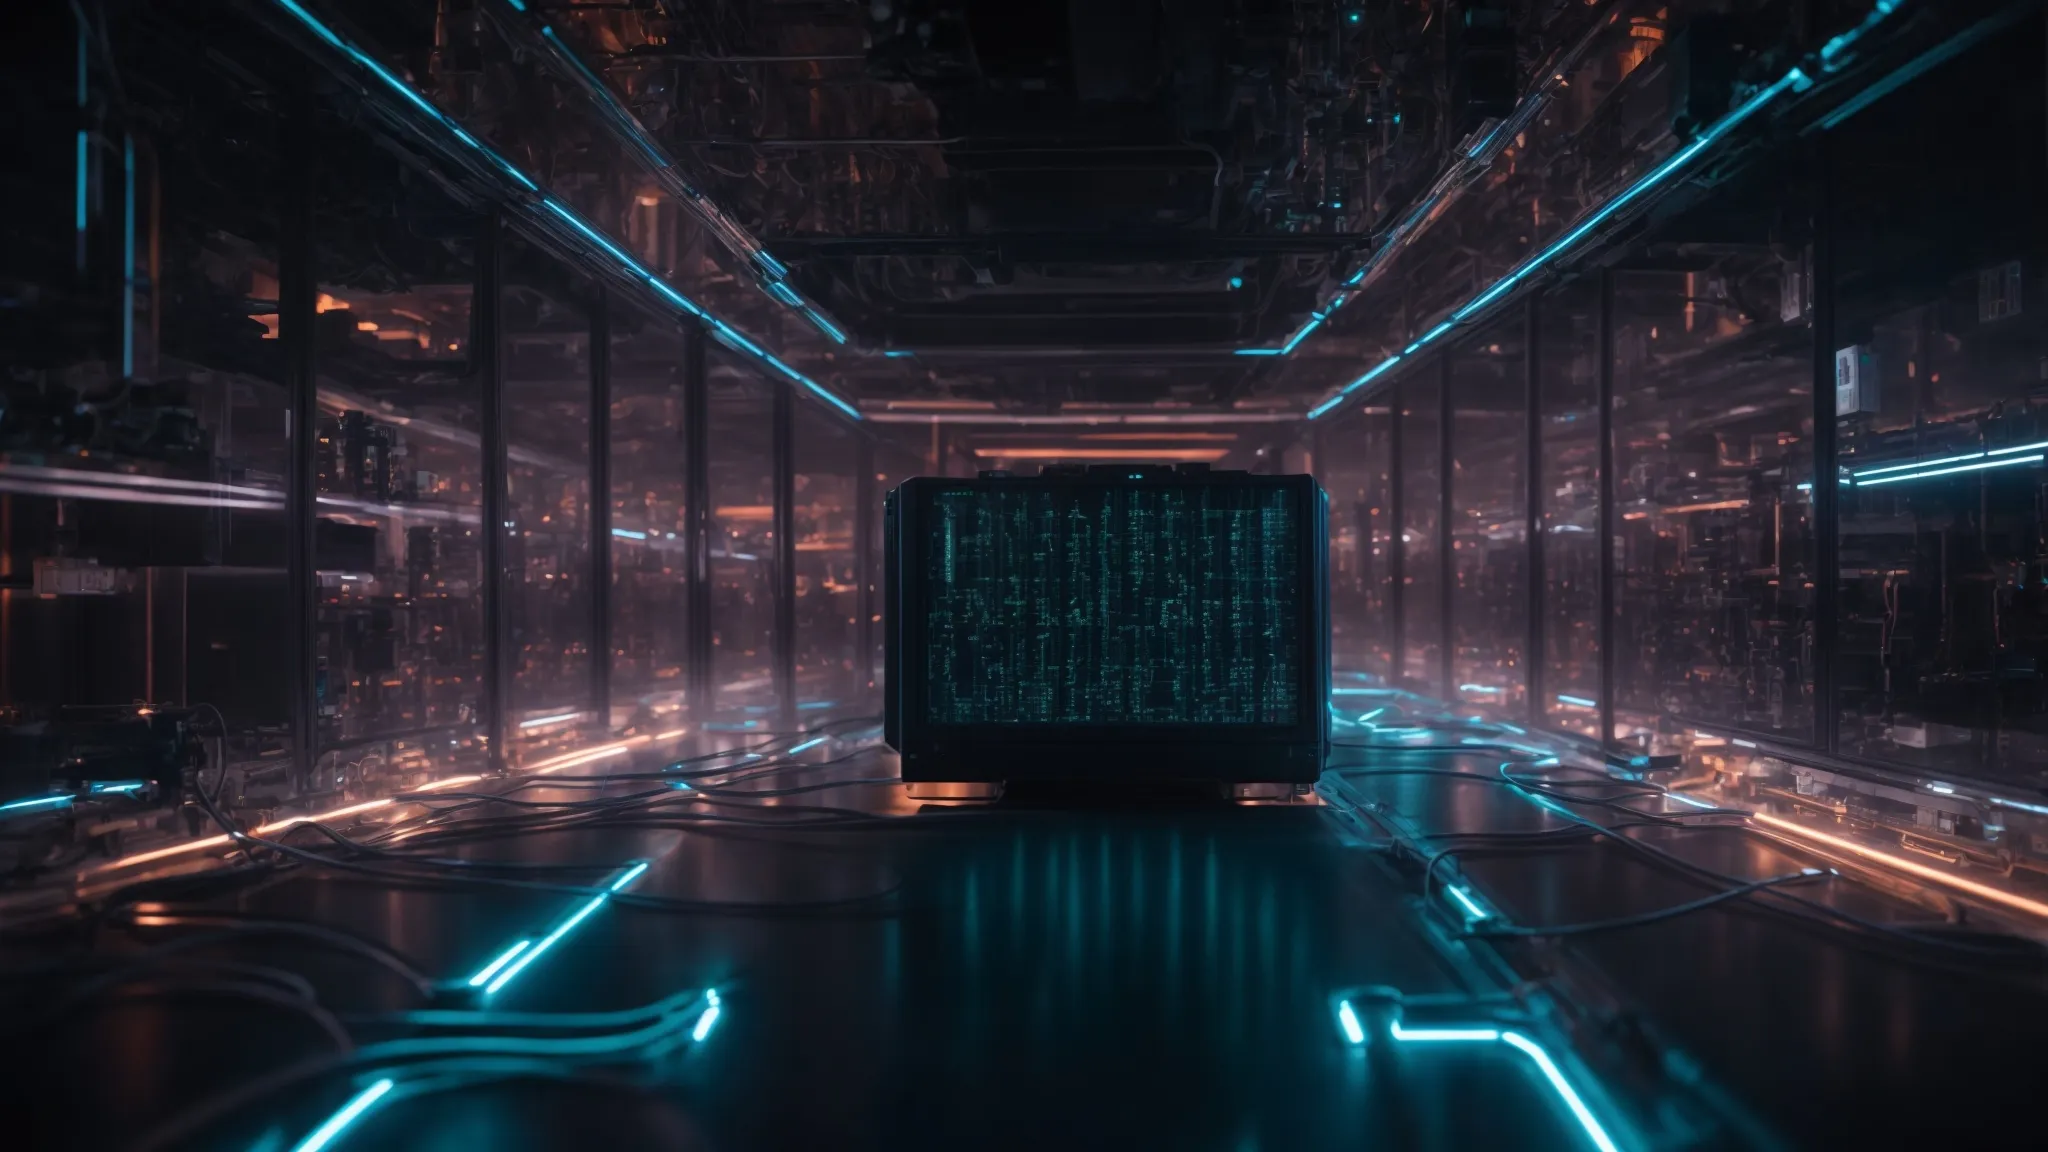 a vast network of futuristic, glowing quantum computers interconnected in a dimly lit high-tech laboratory.